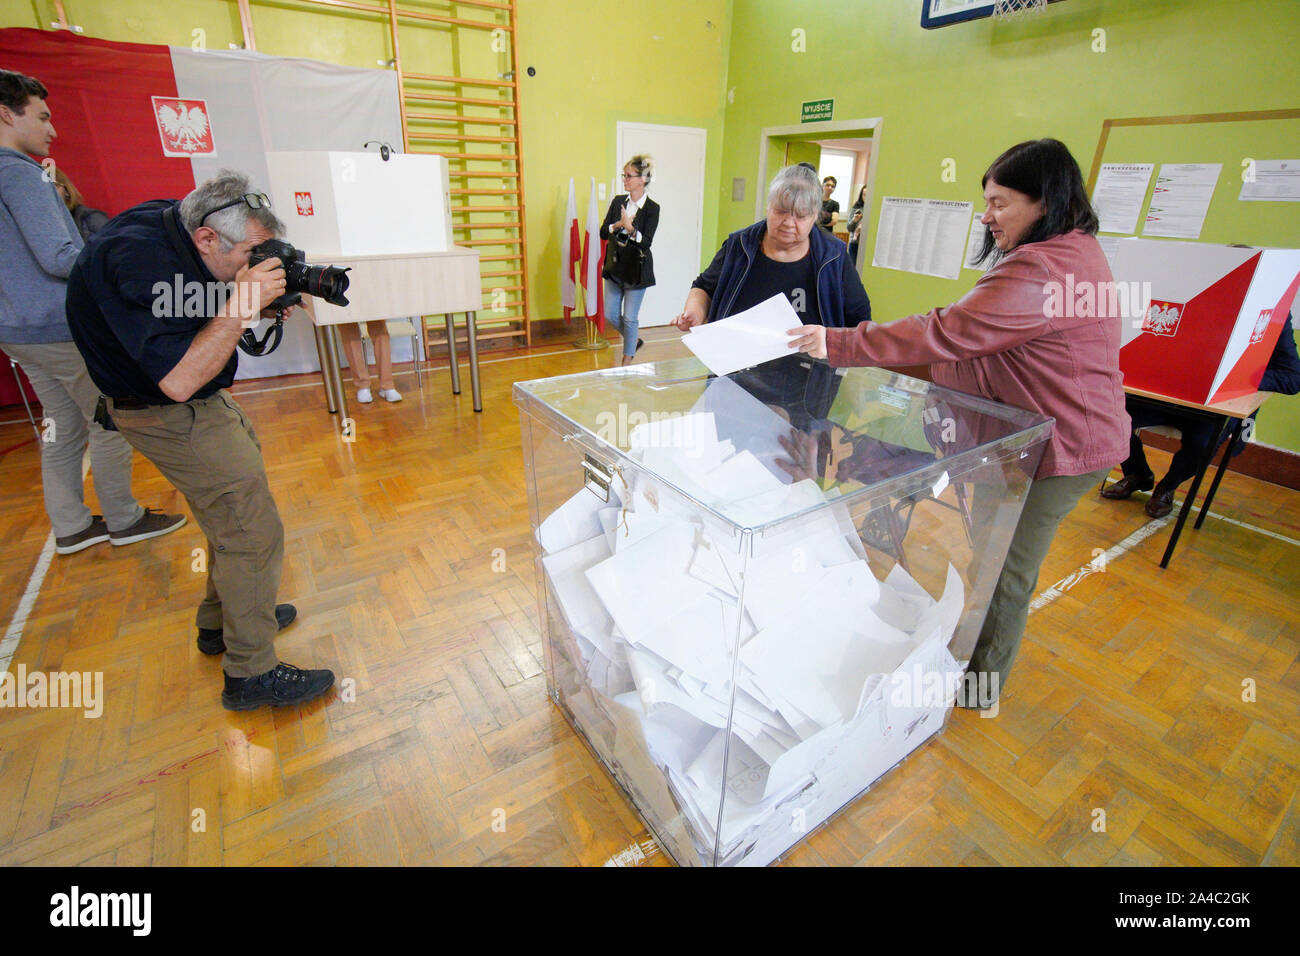 Warsaw, Poland. 13th Oct, 2019. People cast their ballots at a voting station in Warsaw, Poland, on Oct. 13, 2019. The exit poll after the closing of the vote in Poland at 9 p.m. on Sunday indicated governing Law and Justice party (PiS) won 43.6 percent of the vote in the parliamentary election. Credit: Jaap Arriens/Xinhua/Alamy Live News Stock Photo